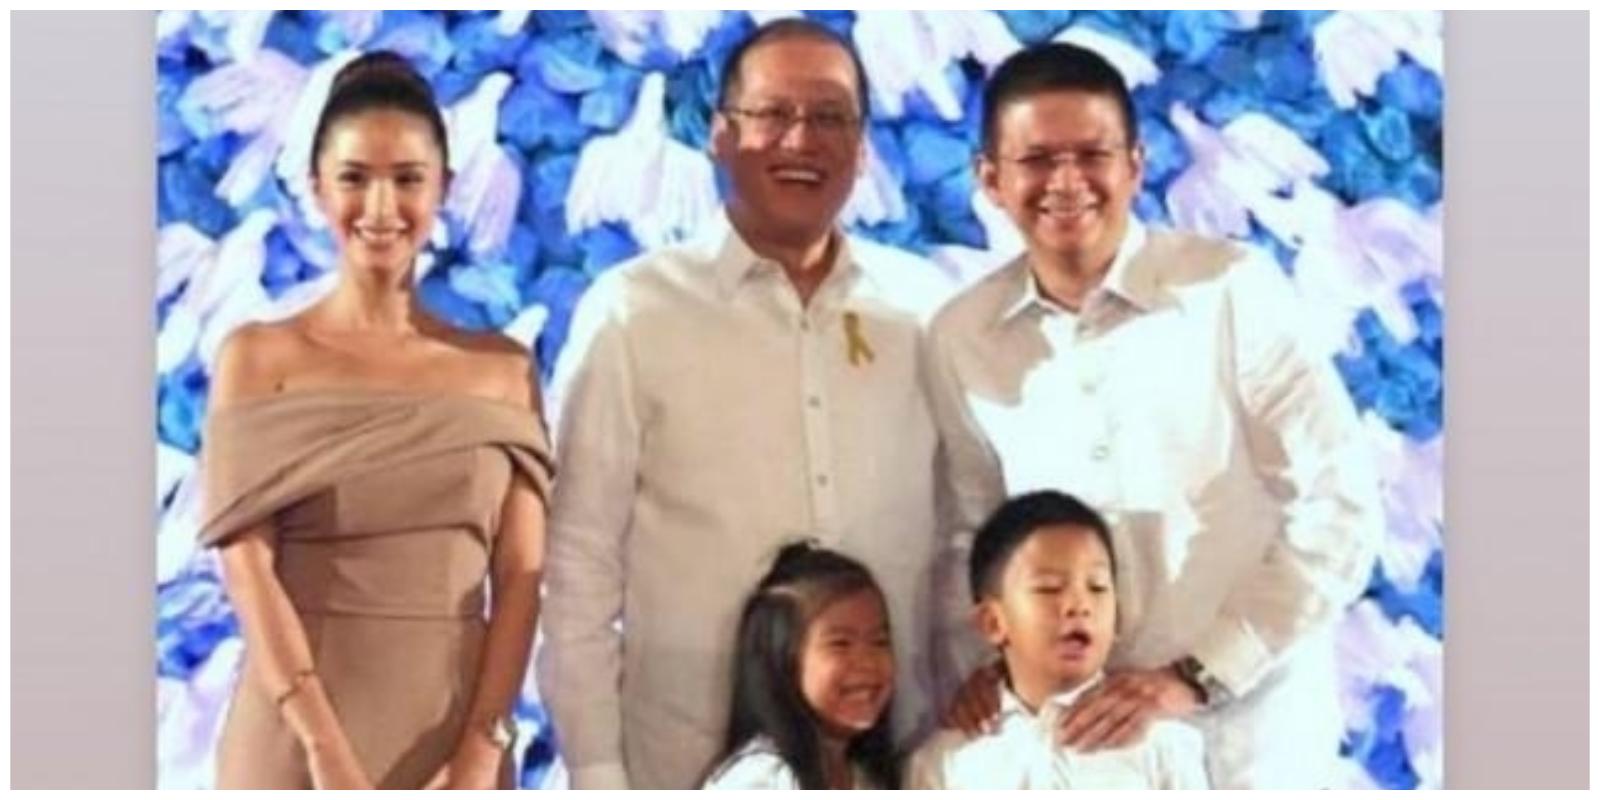 Celebrities mourn the death of PNoy | GMA News Online